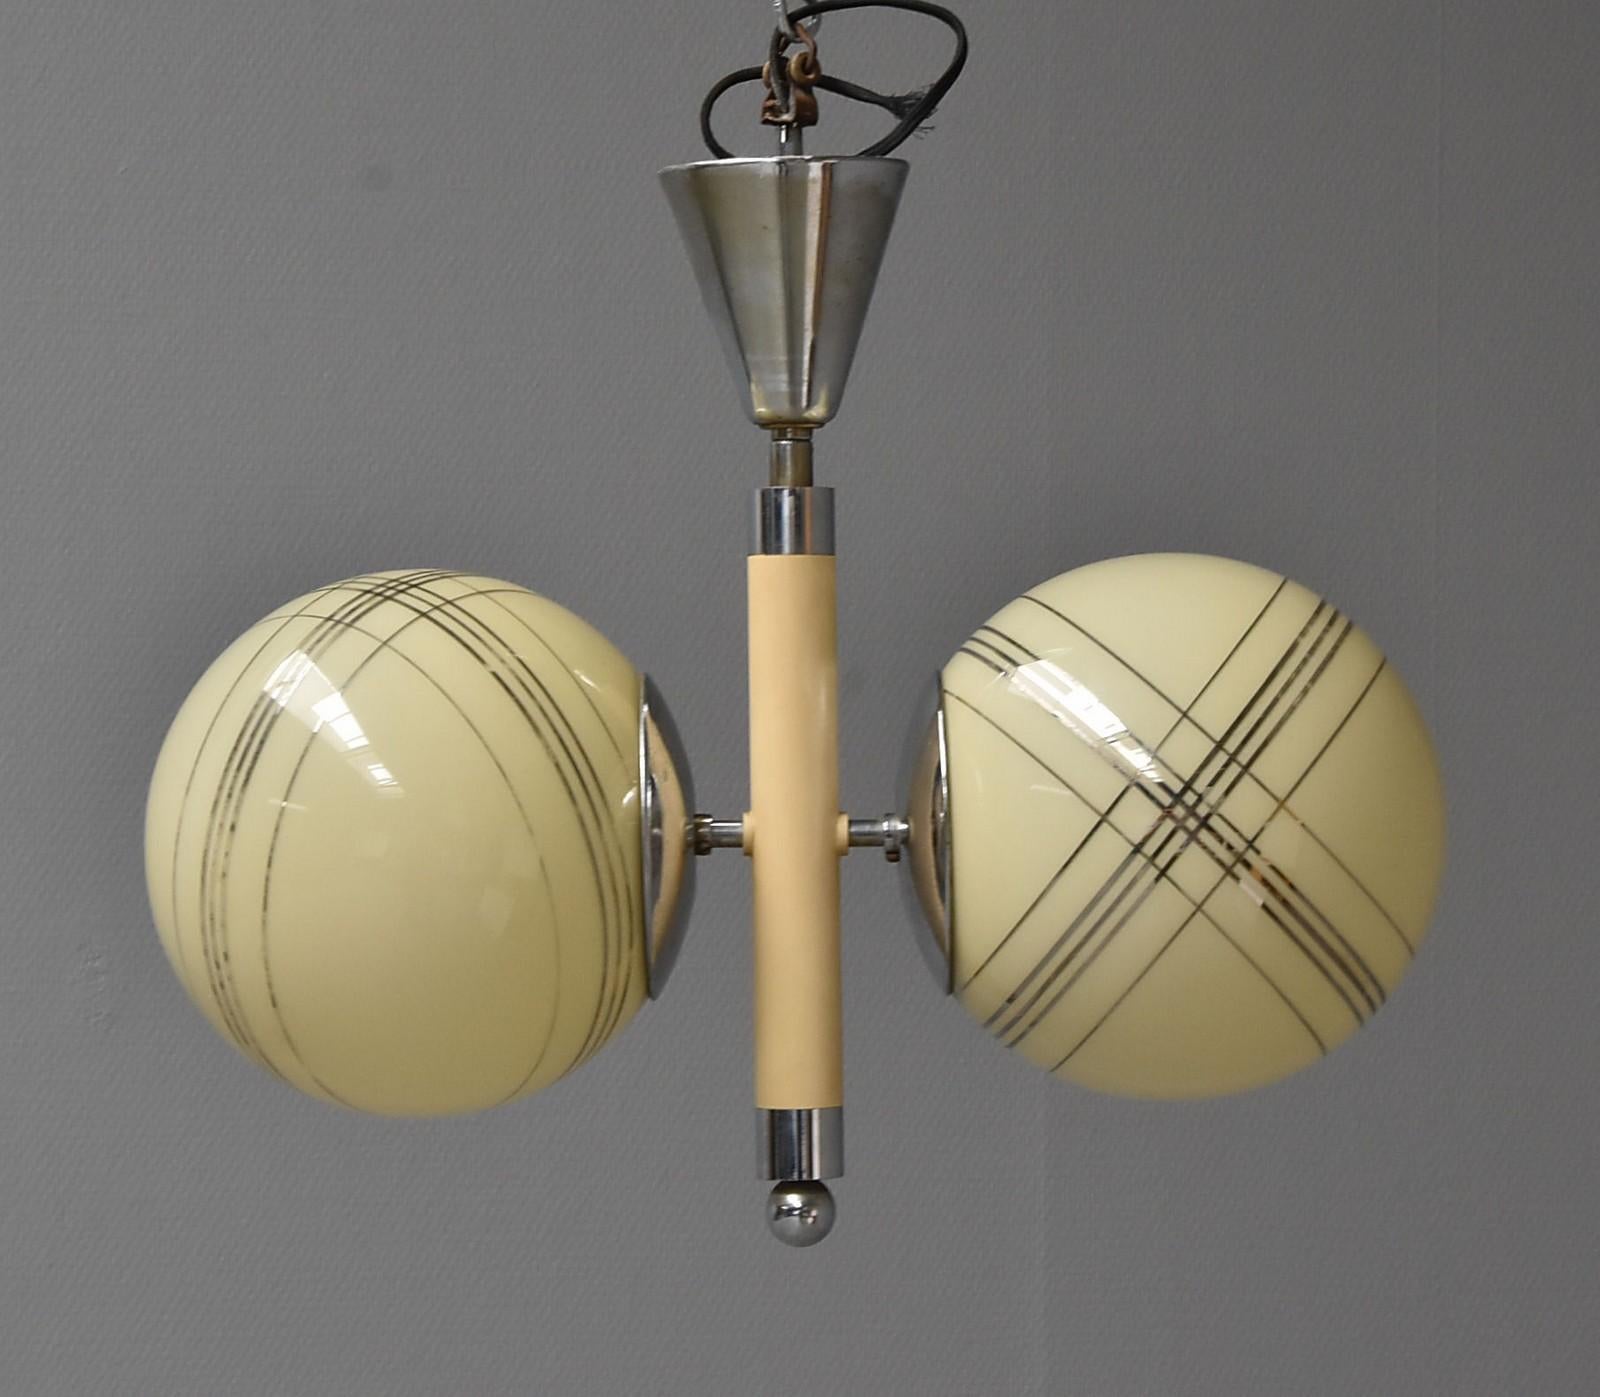 Art Deco chandelier with a nickel-plated brass frame, globe-shaped striped glass shades. Manufactured in Denmark in the 1920s. Measures body: height 42, width 45cm, old usage, and friction marks.
The length will be customized on request.
 